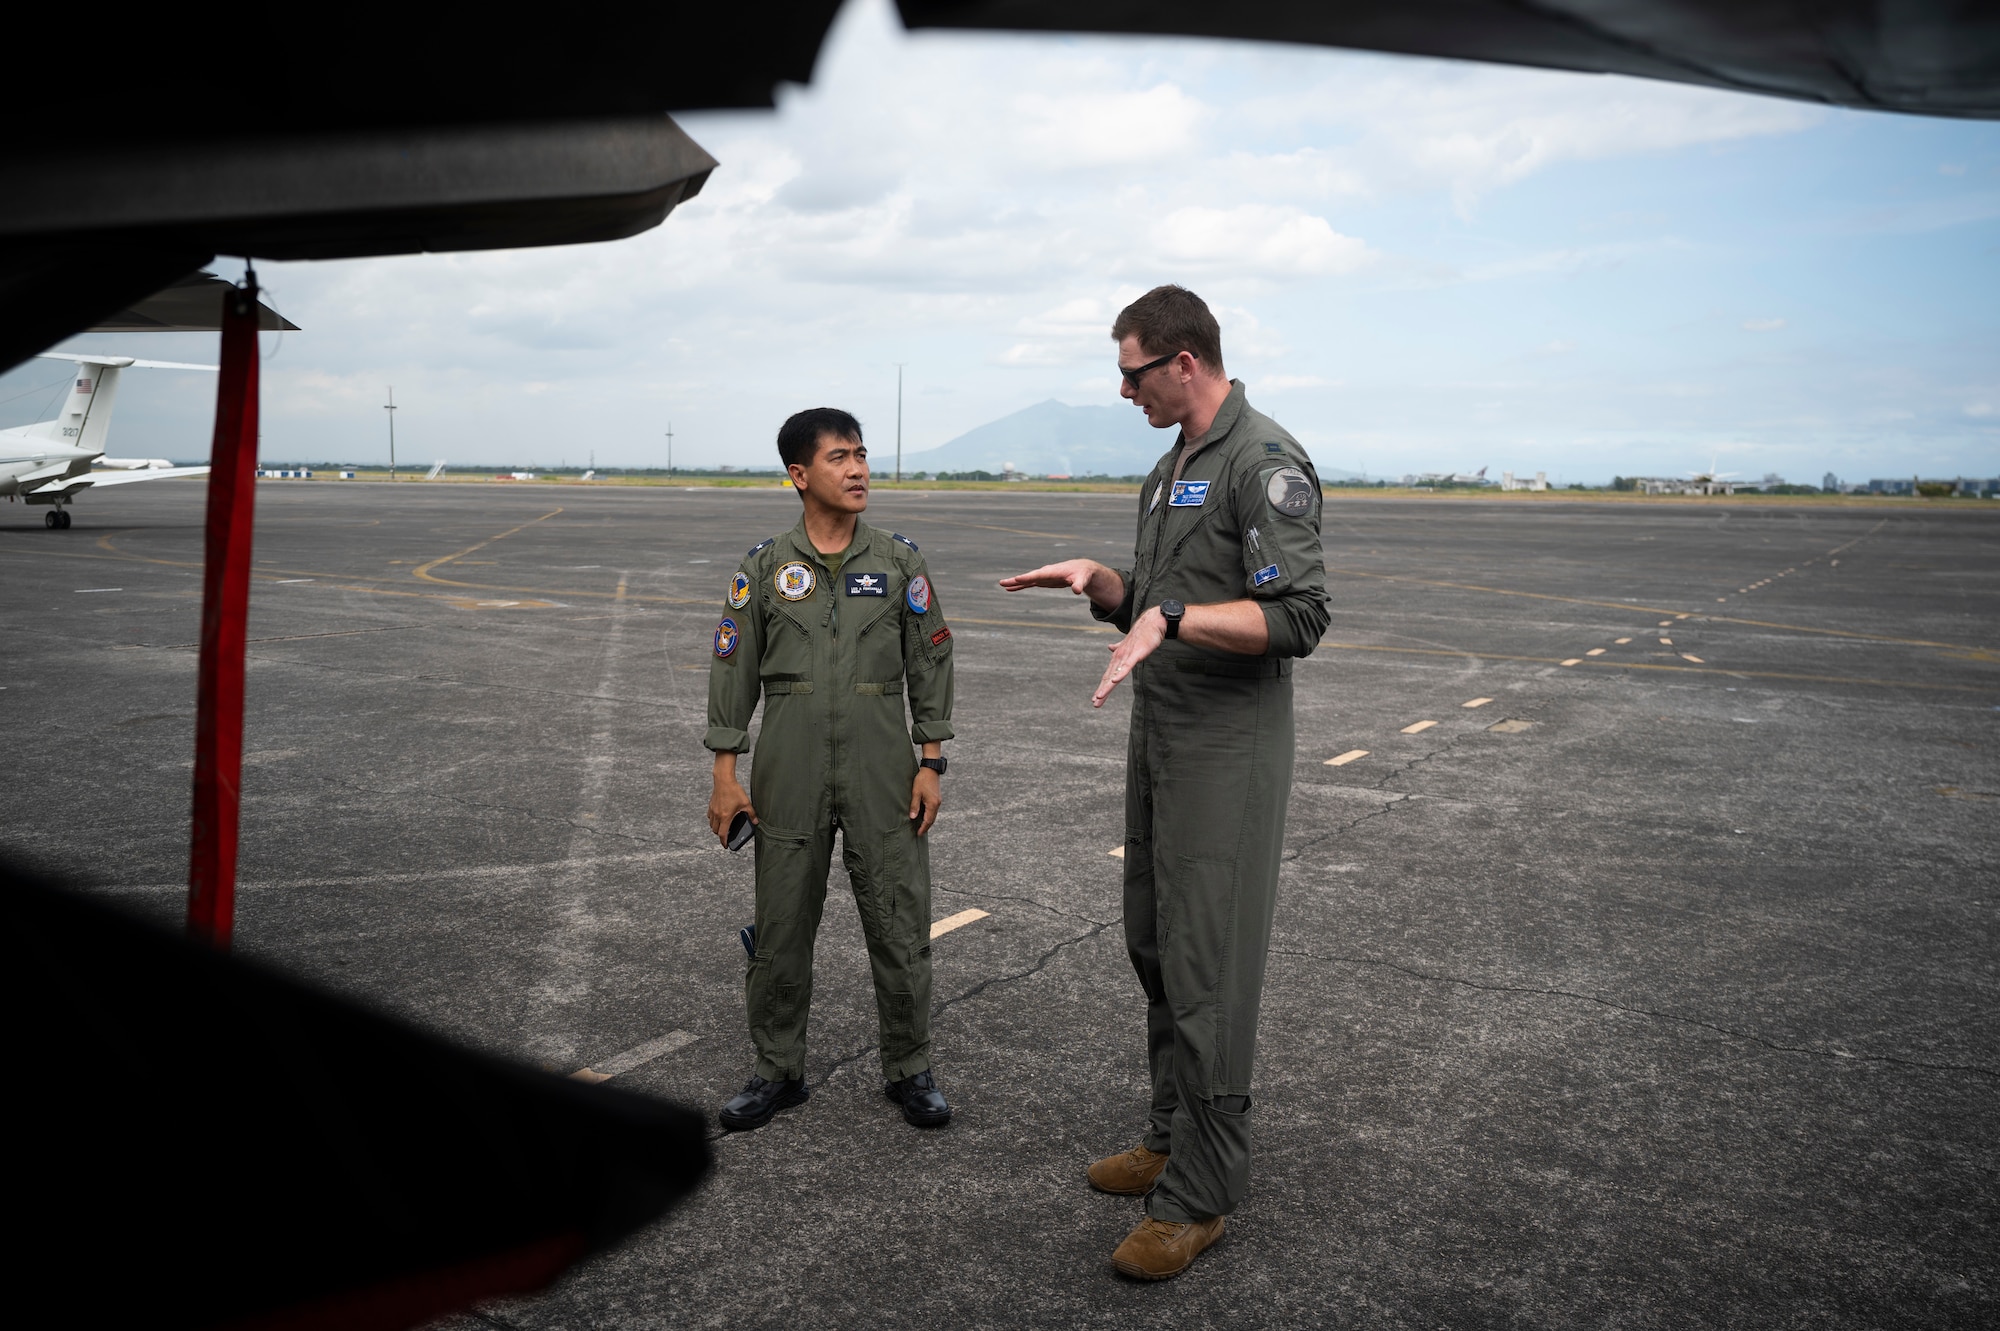 U.S. Air Force Capt. Karl Schroeder, 525th Fighter Squadron F-22A Raptor pilot, briefs Philippine Air Force Brig. Gen. Leo Fontanilla, 5th Fighter Wing commander, on the capabilities of the Raptor during a static aircraft tour at Clark Air Base, Philippines, March 13, 2023. Bilateral training and cooperation with our Philippine Air Force counterparts enhances the mutual readiness required to defend security, prosperity, and peace throughout the Indo-Pacific region. (U.S. Air Force photo by Senior Airman Jessi Roth)